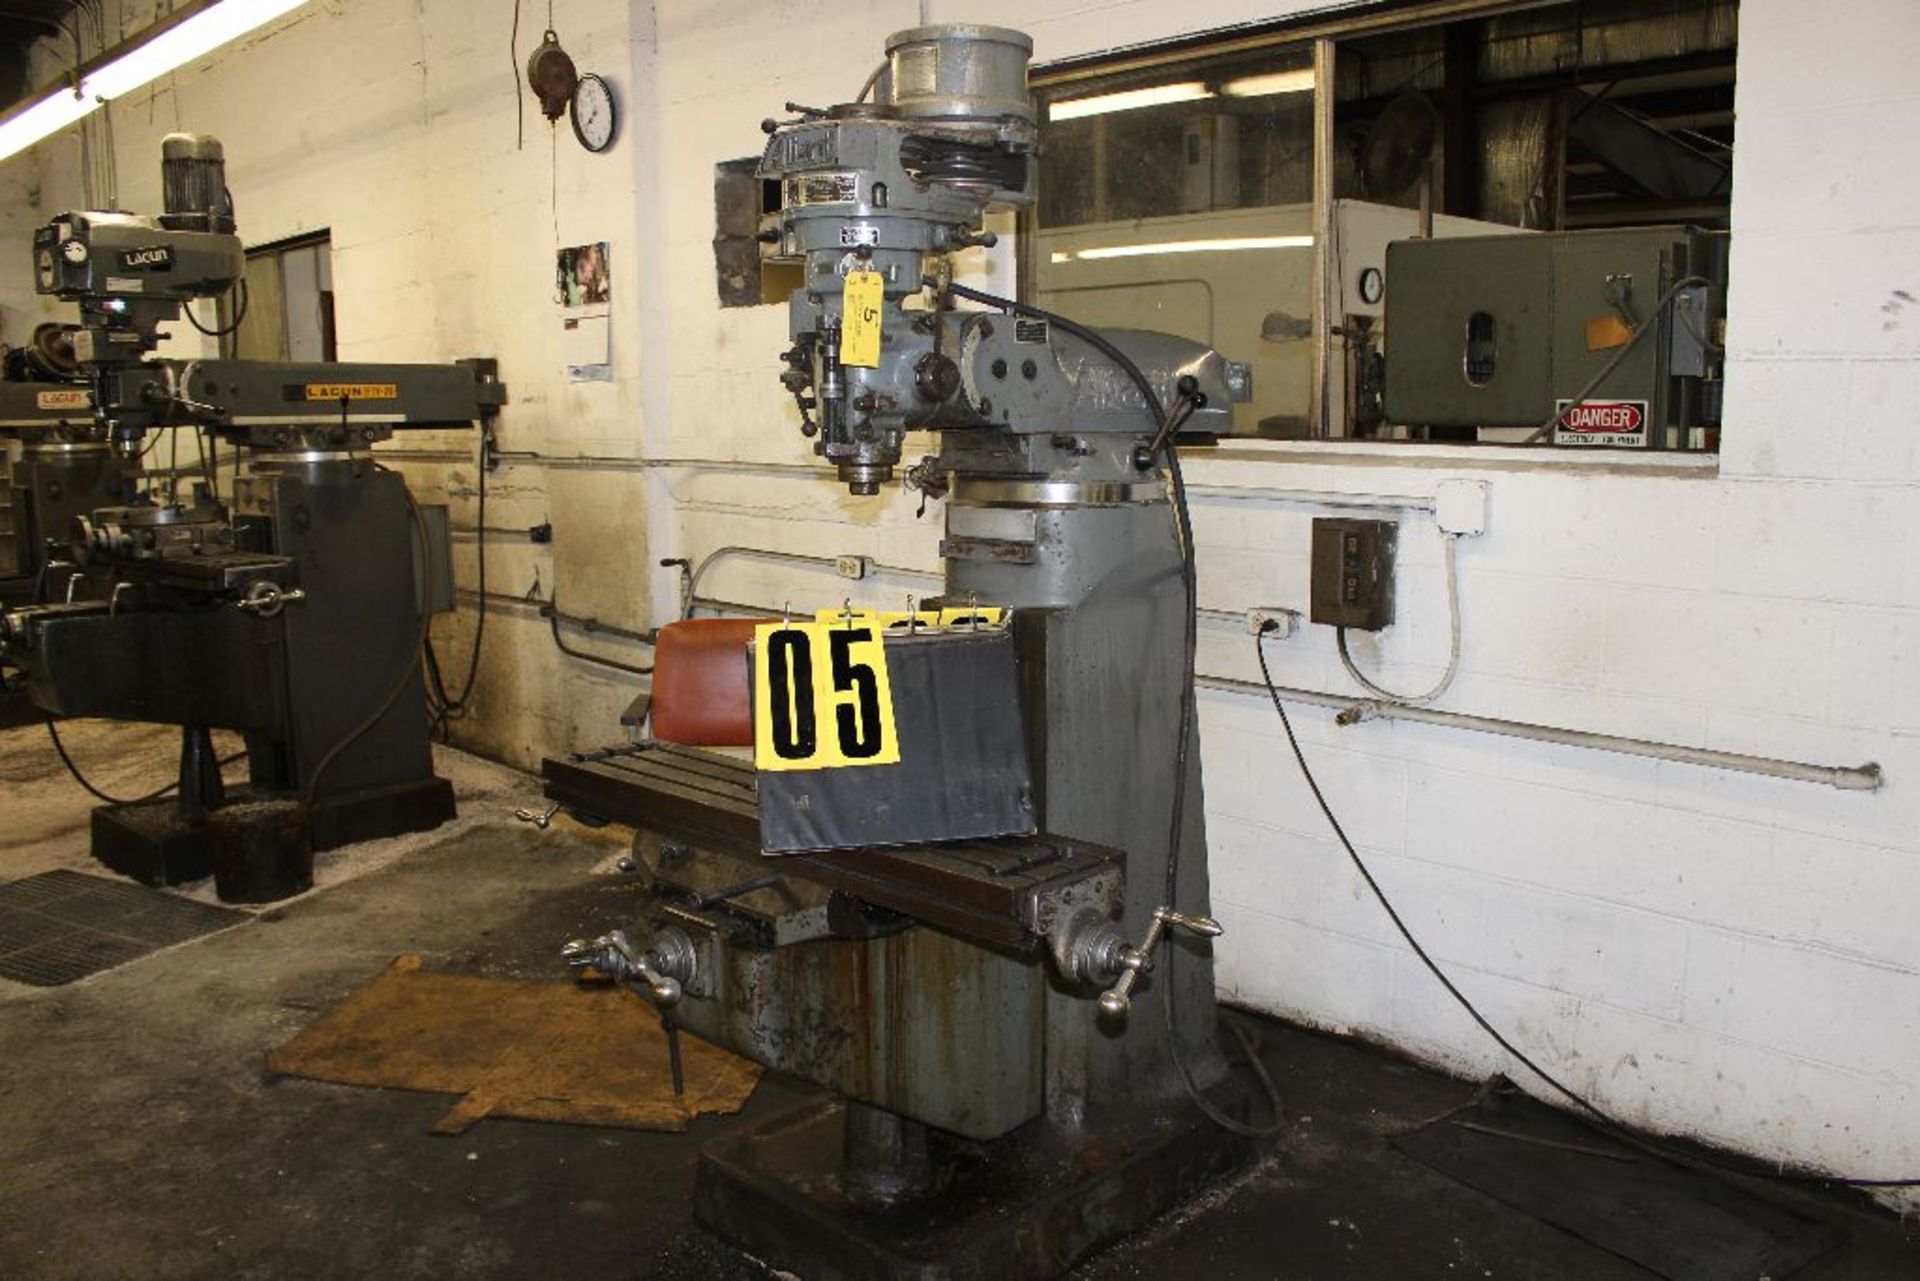 Alliant vertical milling machine, s/n 730842, step pulley head, model 1-1/2TCS, 68-2,280 rpm, 9" x - Image 2 of 2